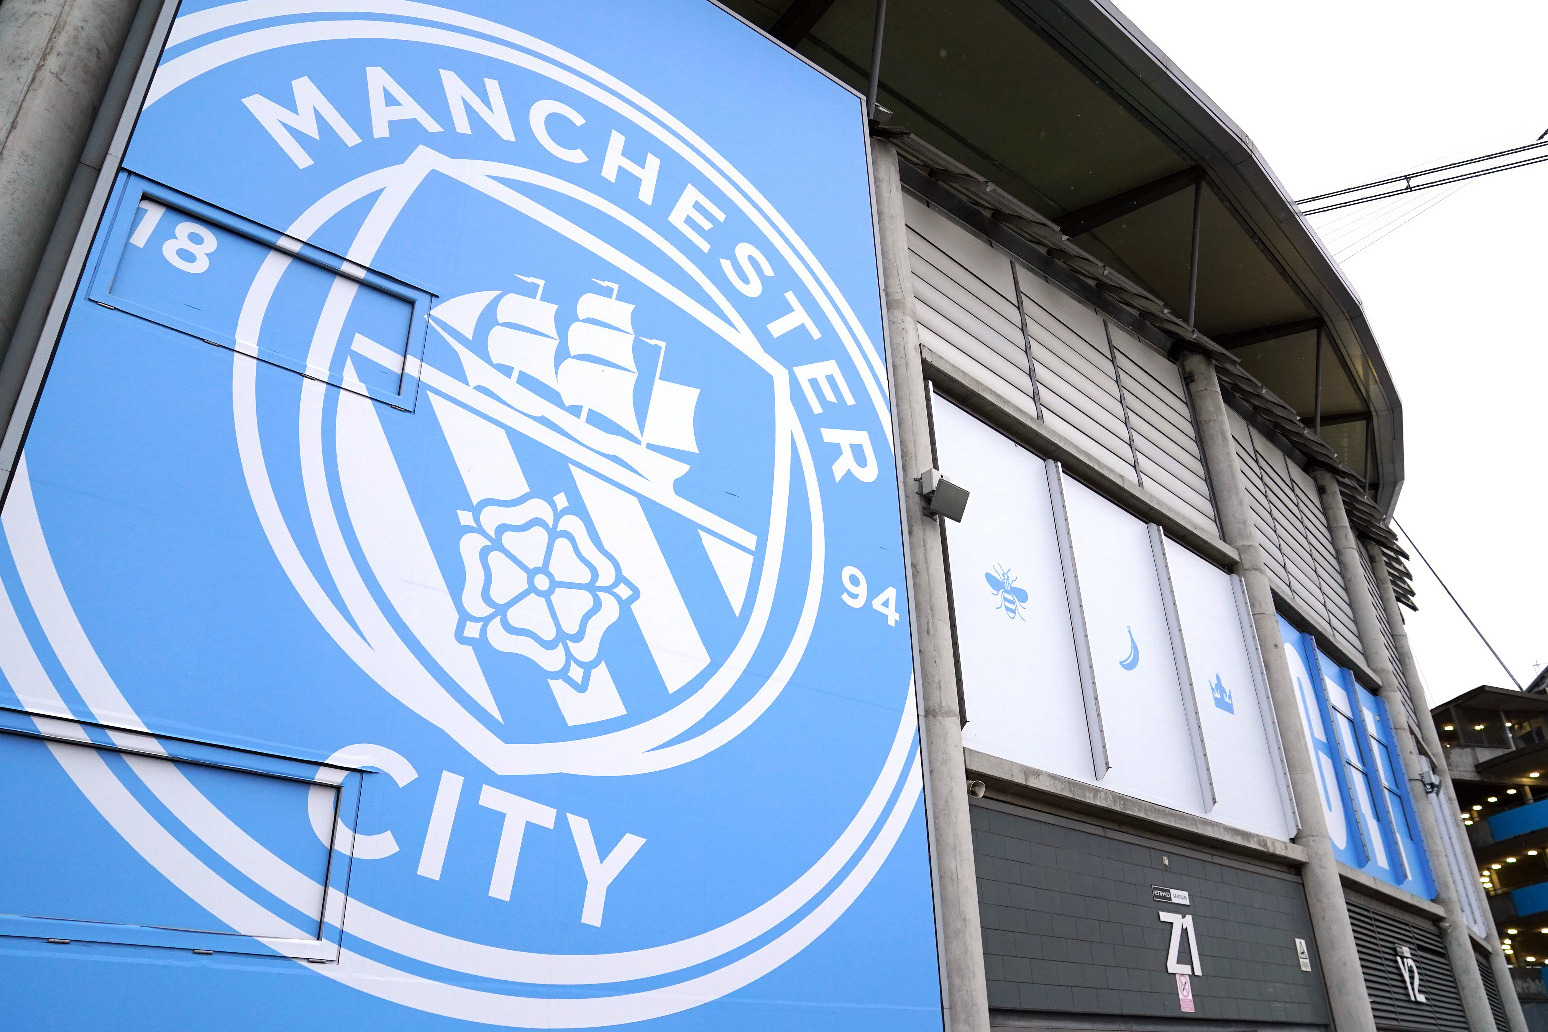 Date set for hearing into Premier League charges against Manchester City 